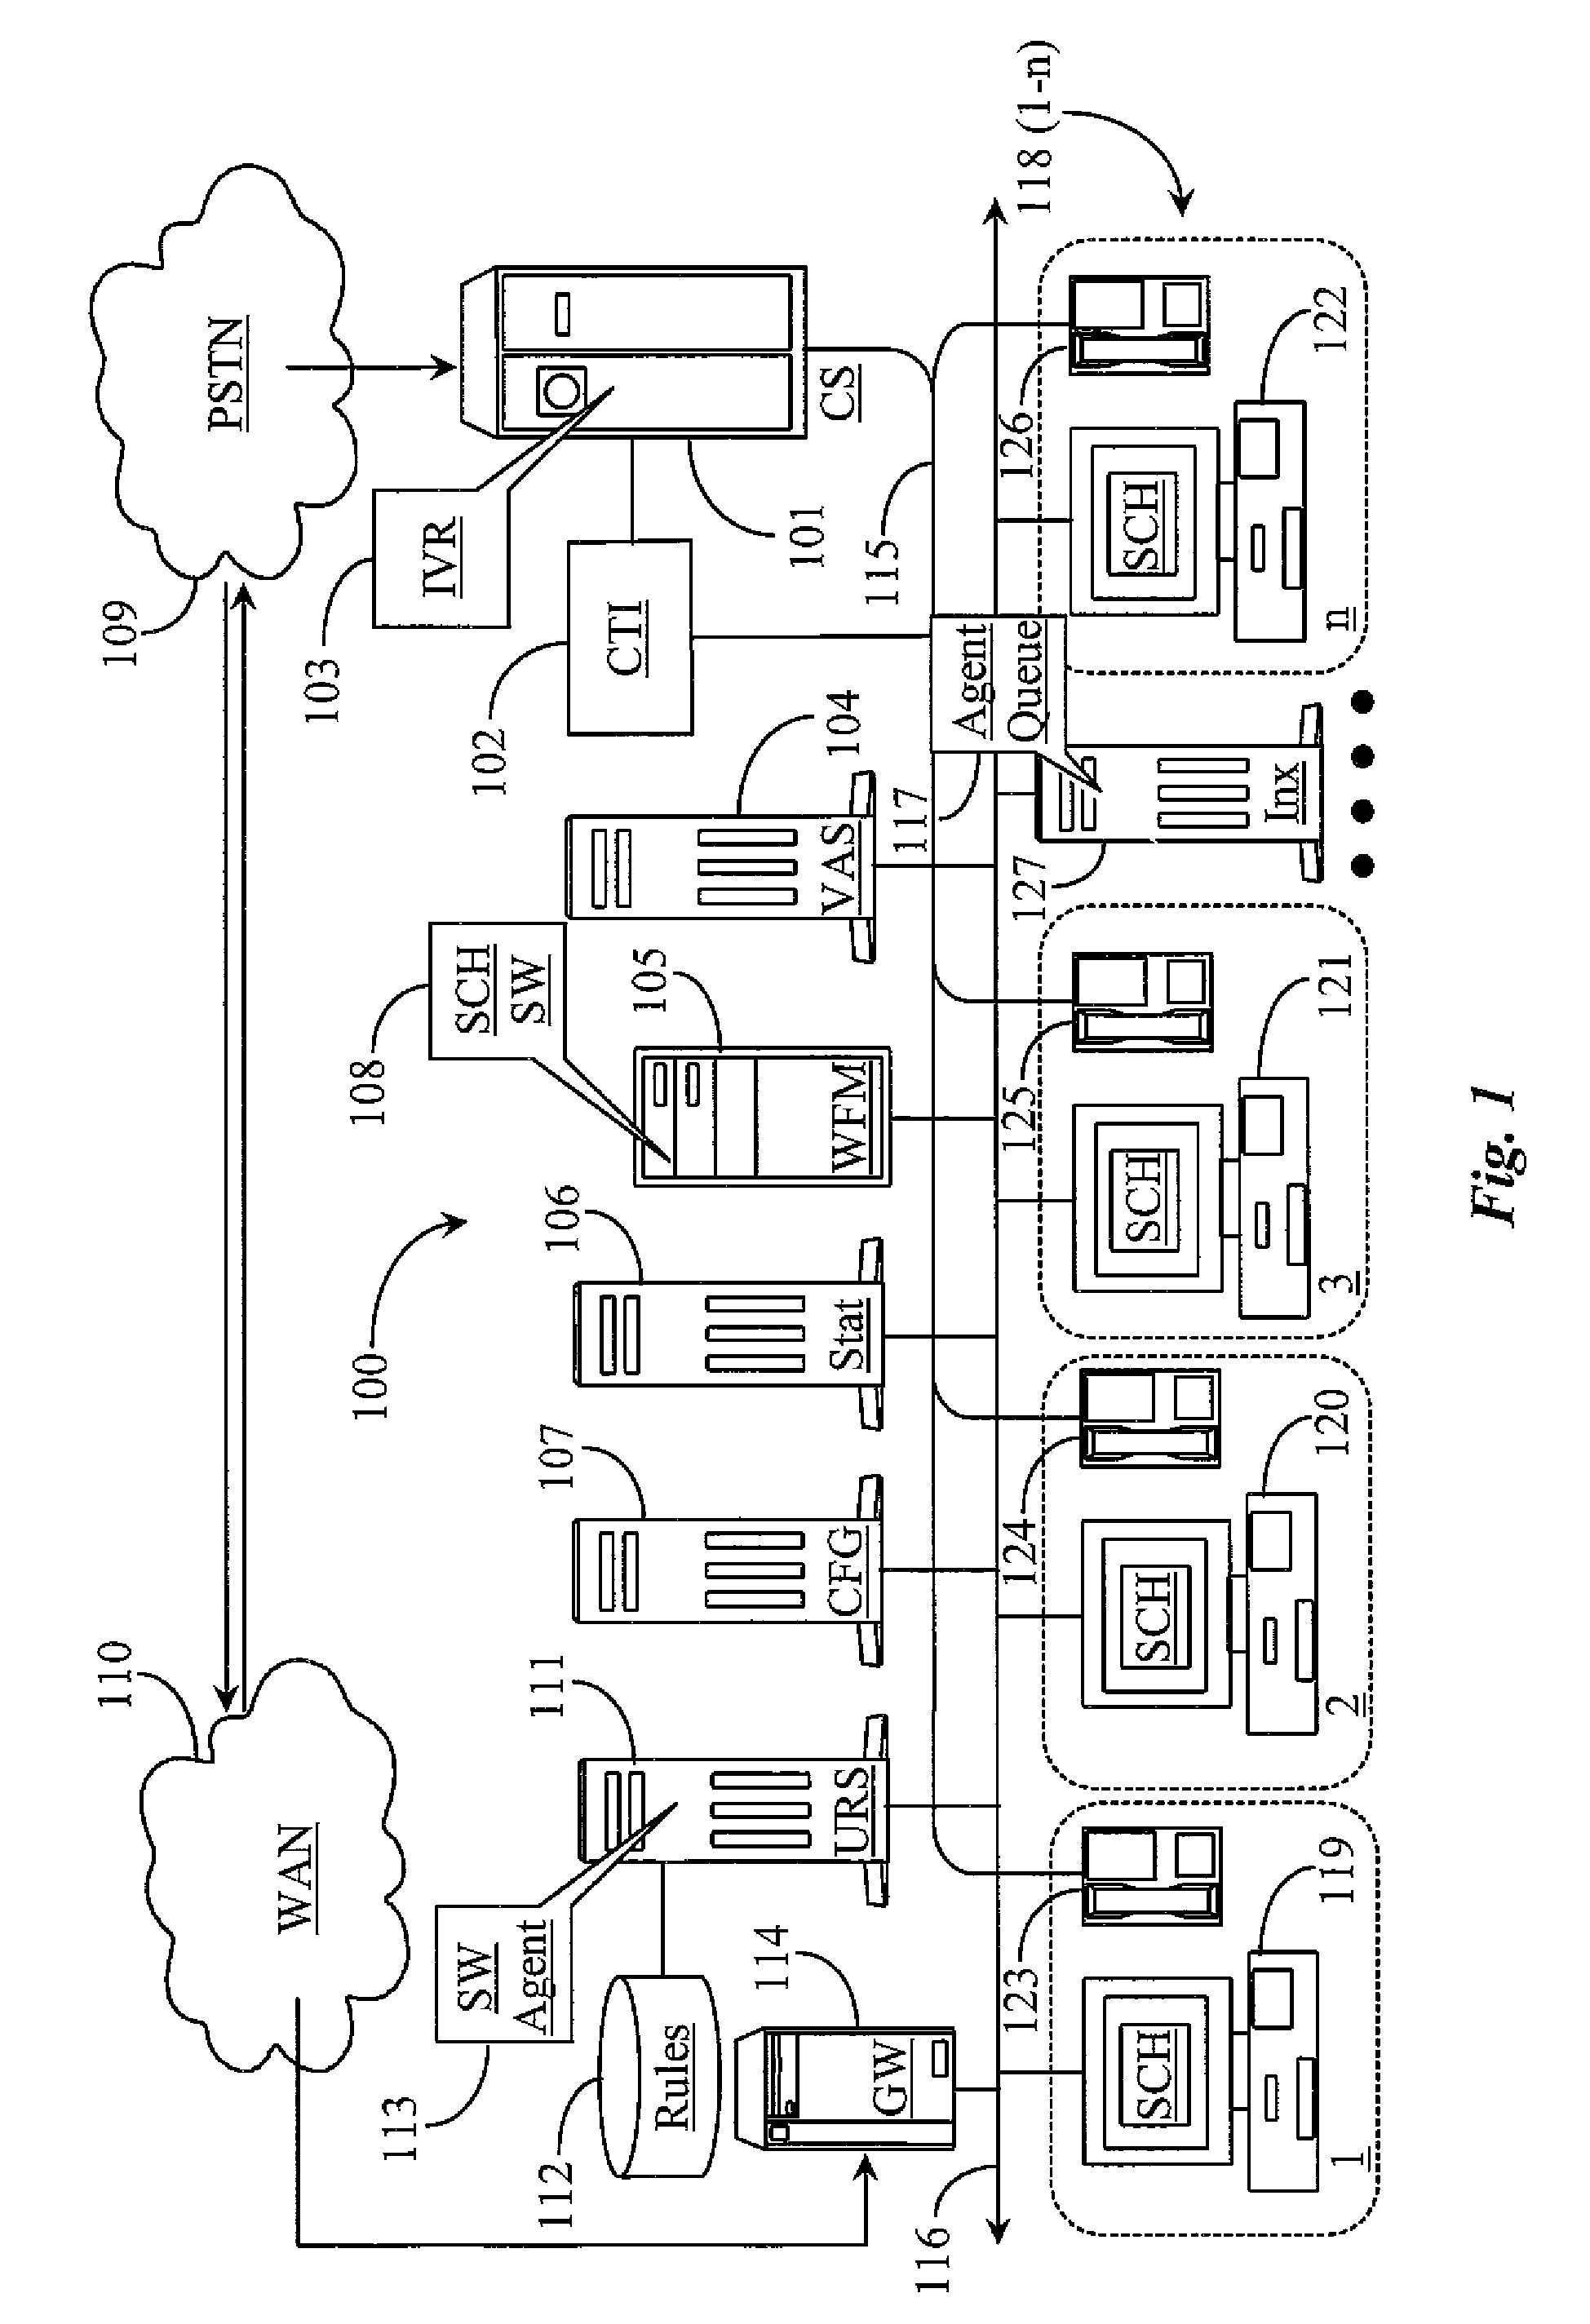 System for scheduling routing rules in a contact center based on forcasted and actual interaction load and staffing requirements